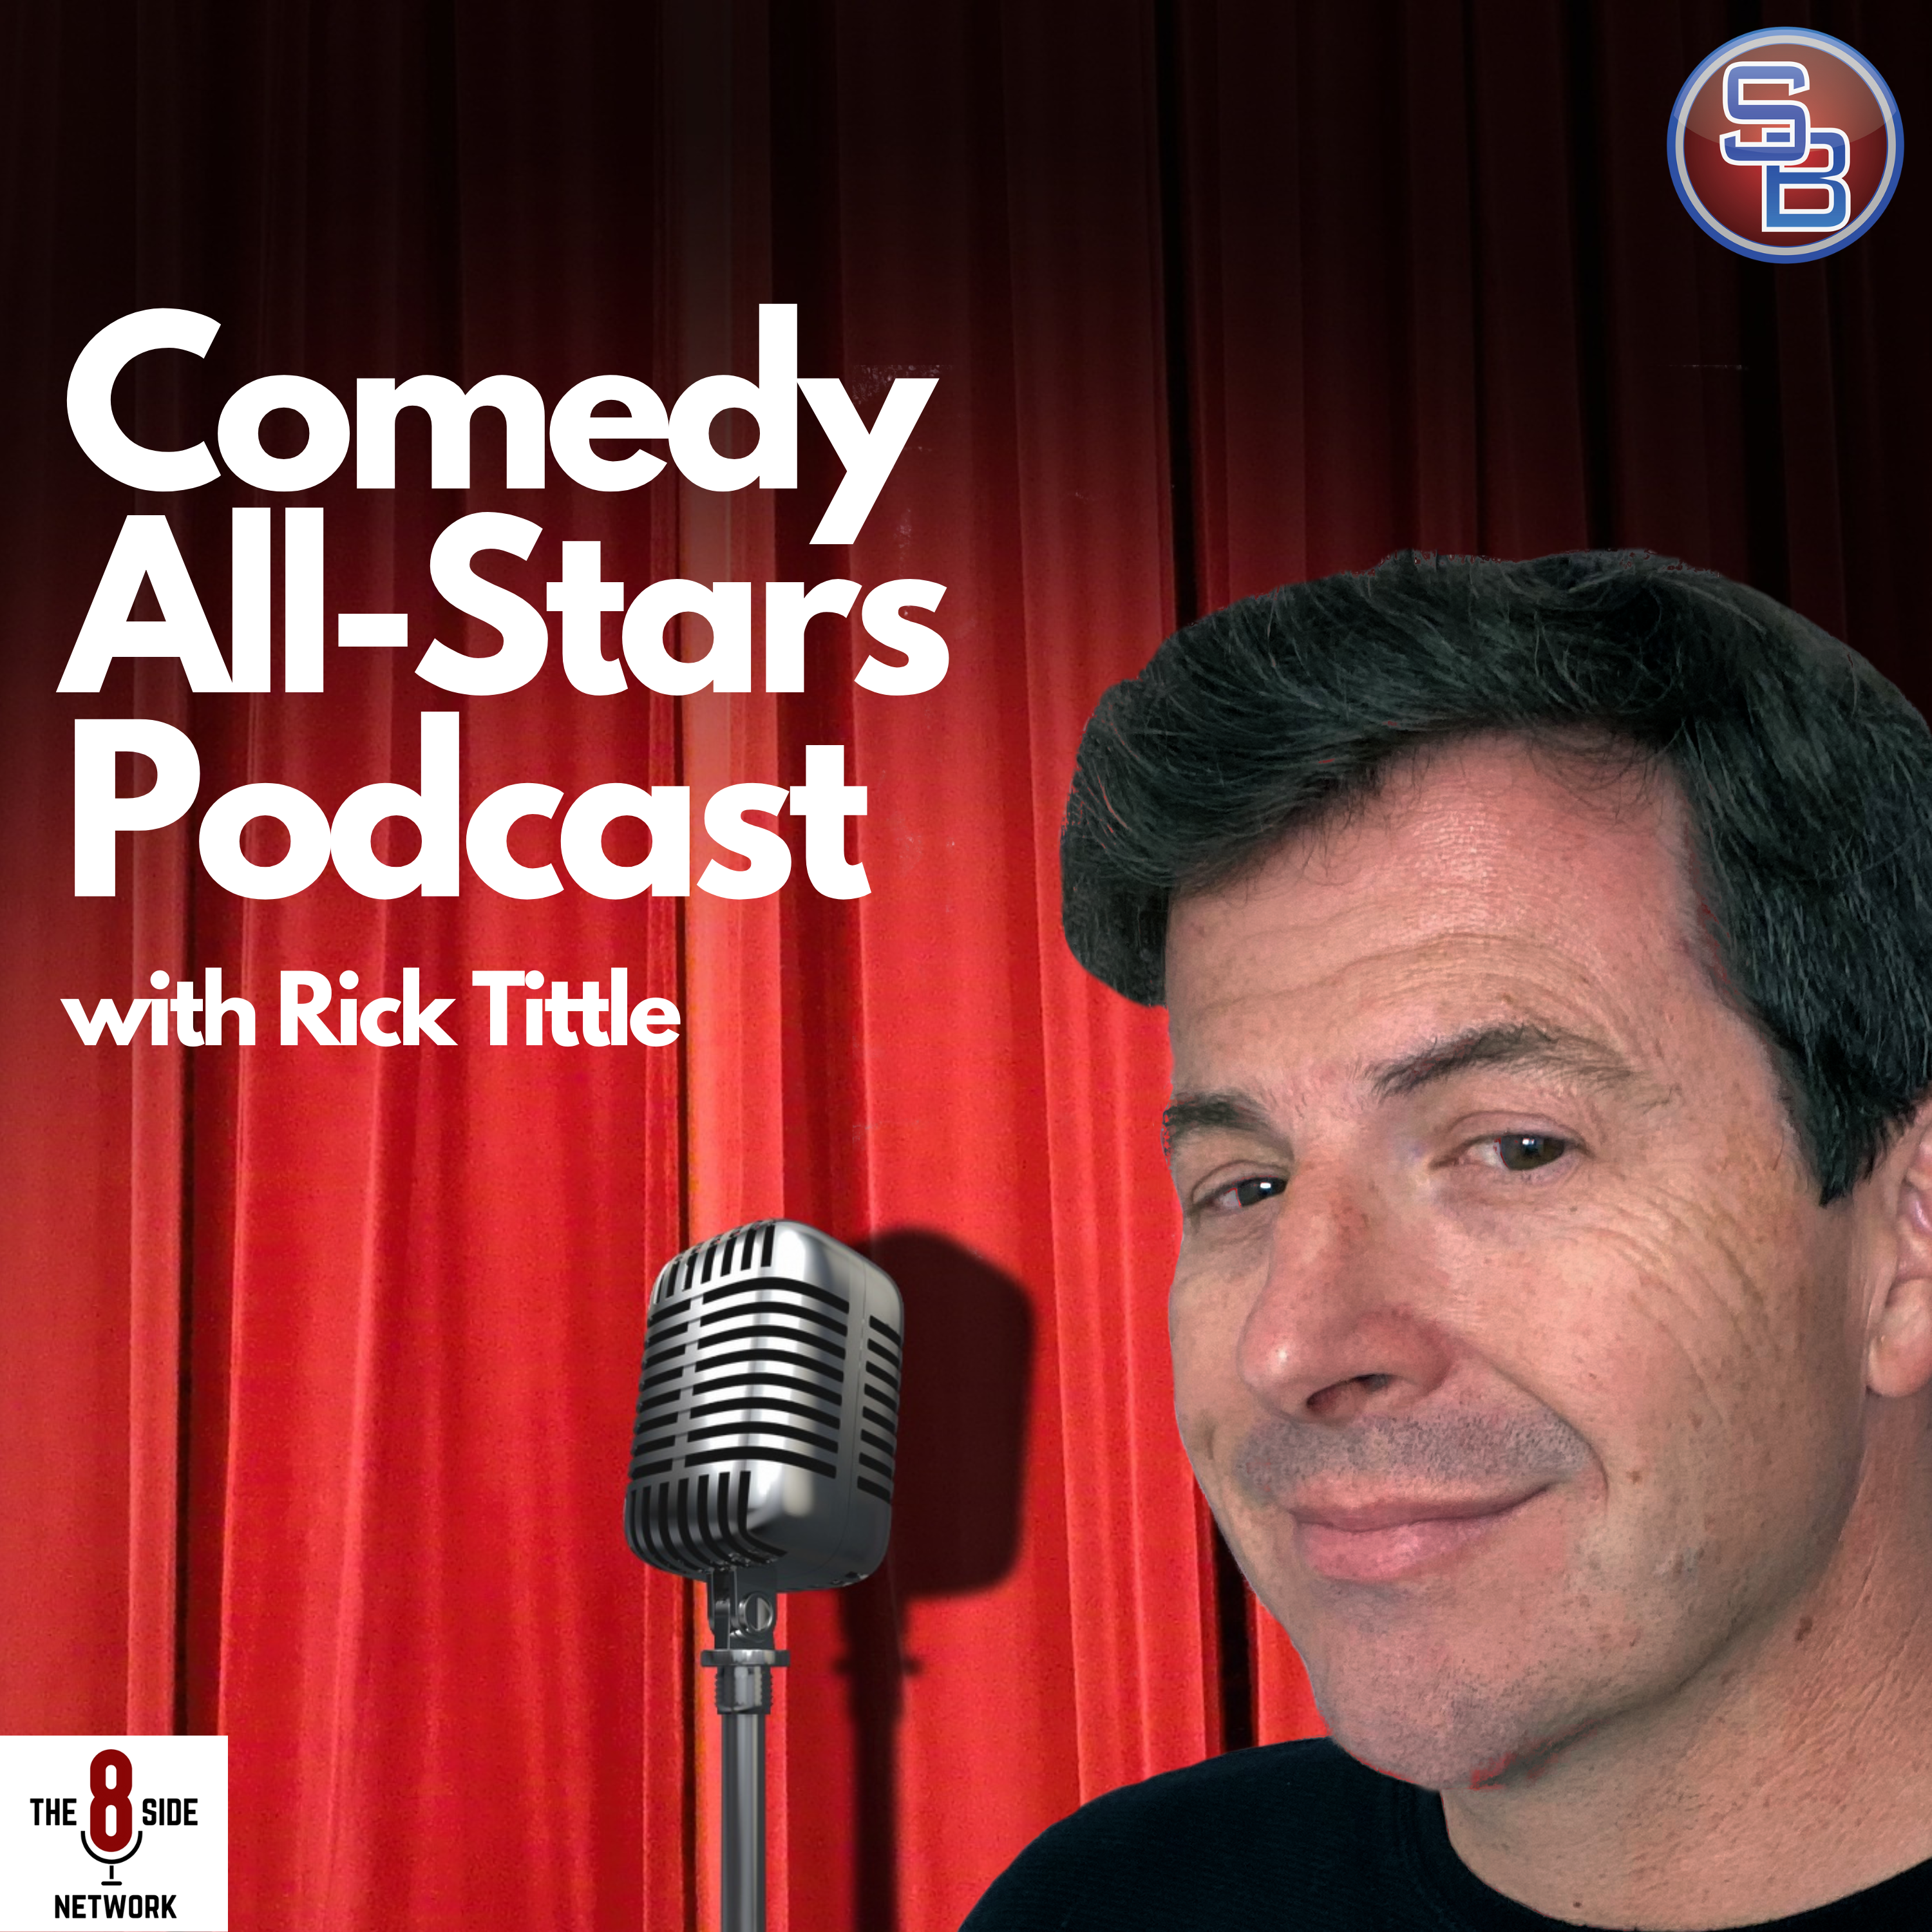 The Rick Tittle Podcast